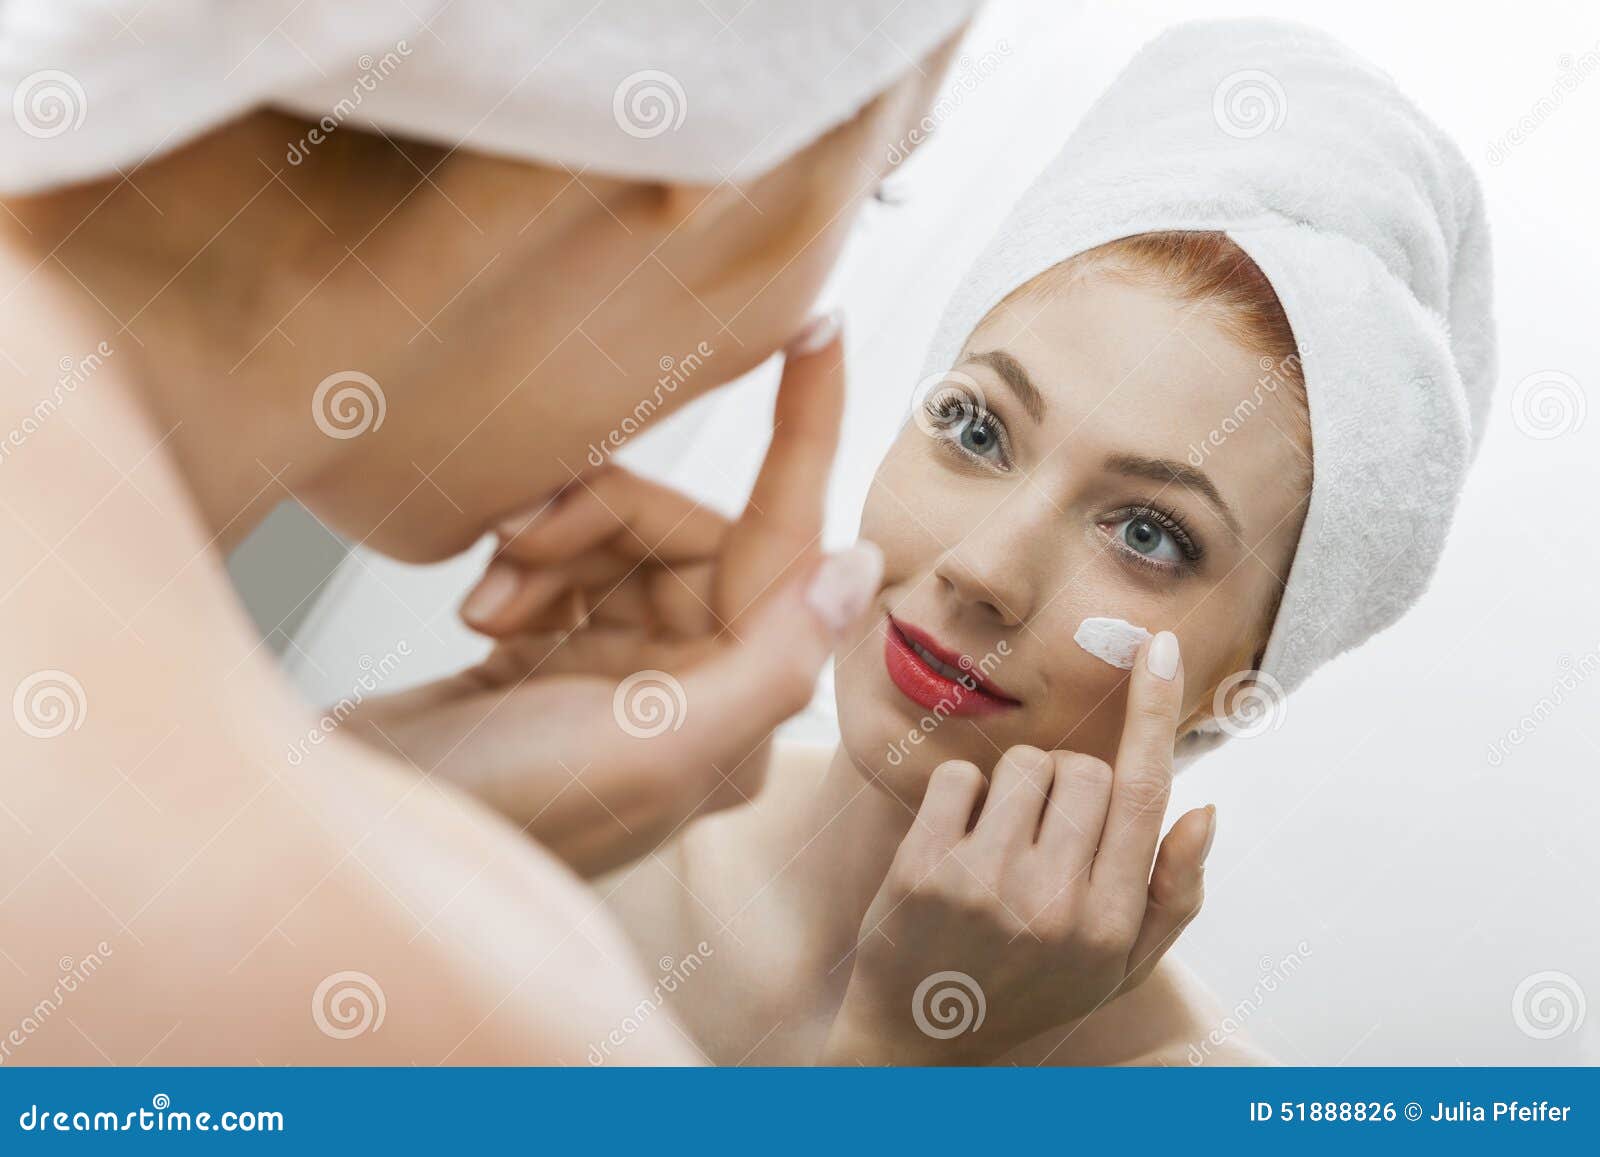 Woman After Shower Applying Cream On Her Face Stock Photo Image 51